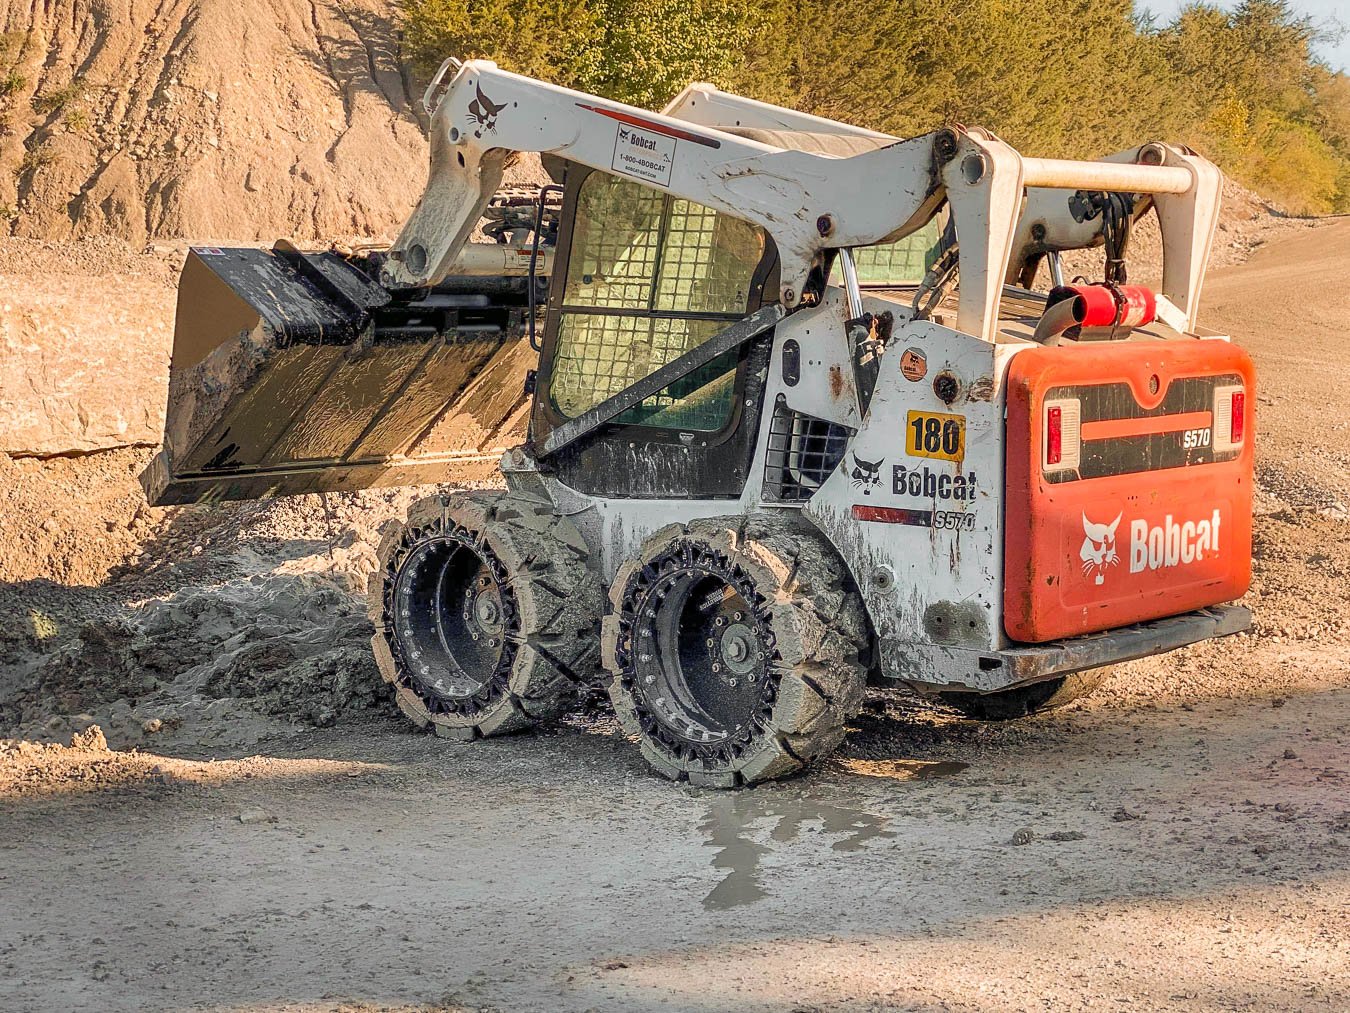 This image shows a BOBCAT S570 with our flat free skid steer tires the EWRS-HS